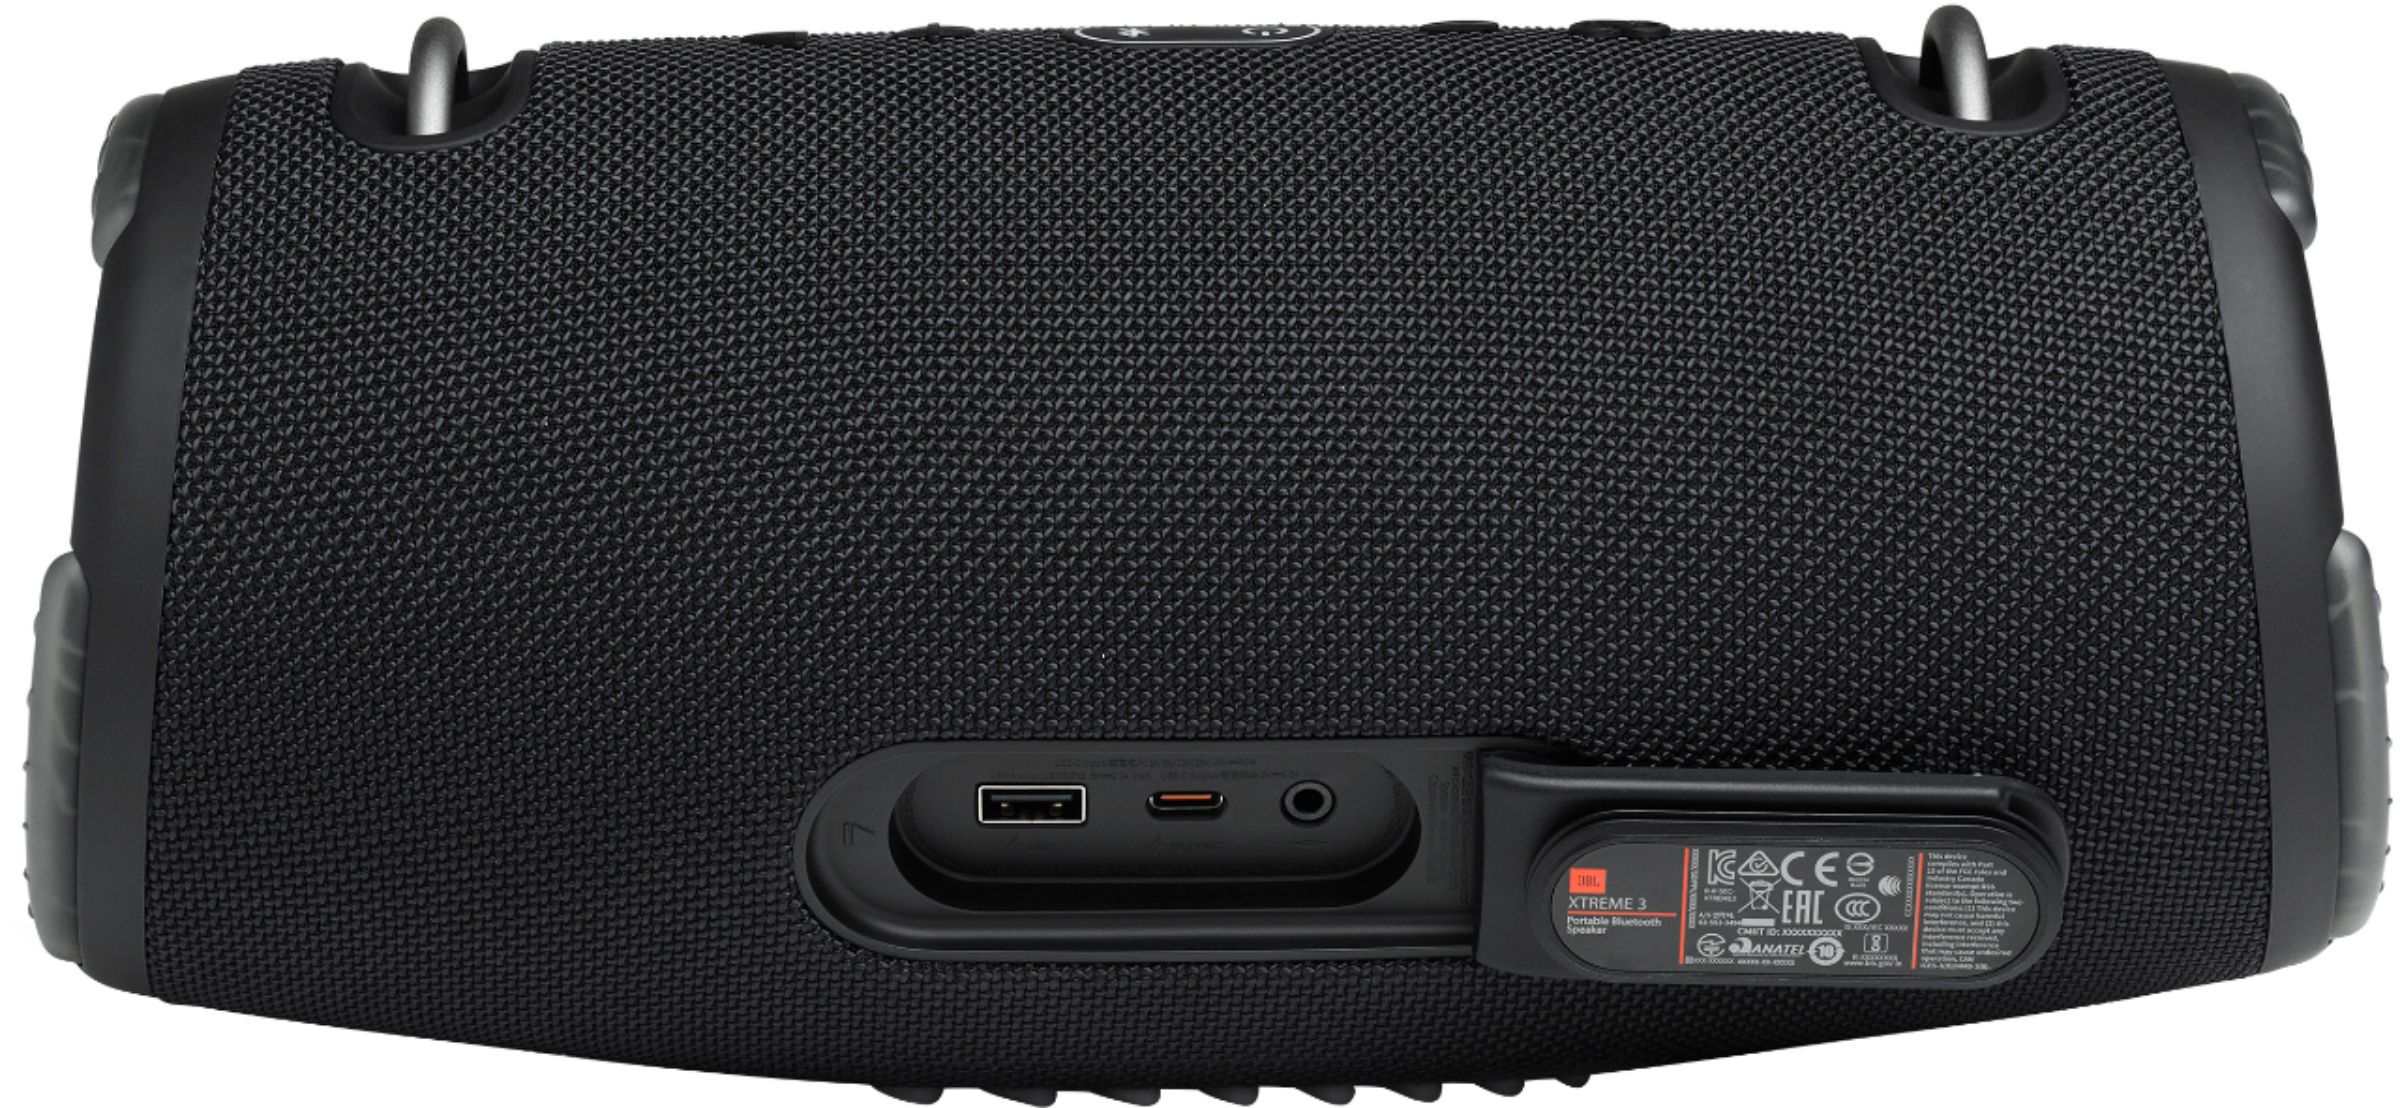 JBL Xtreme 2 (3 stores) find best price • Compare today »